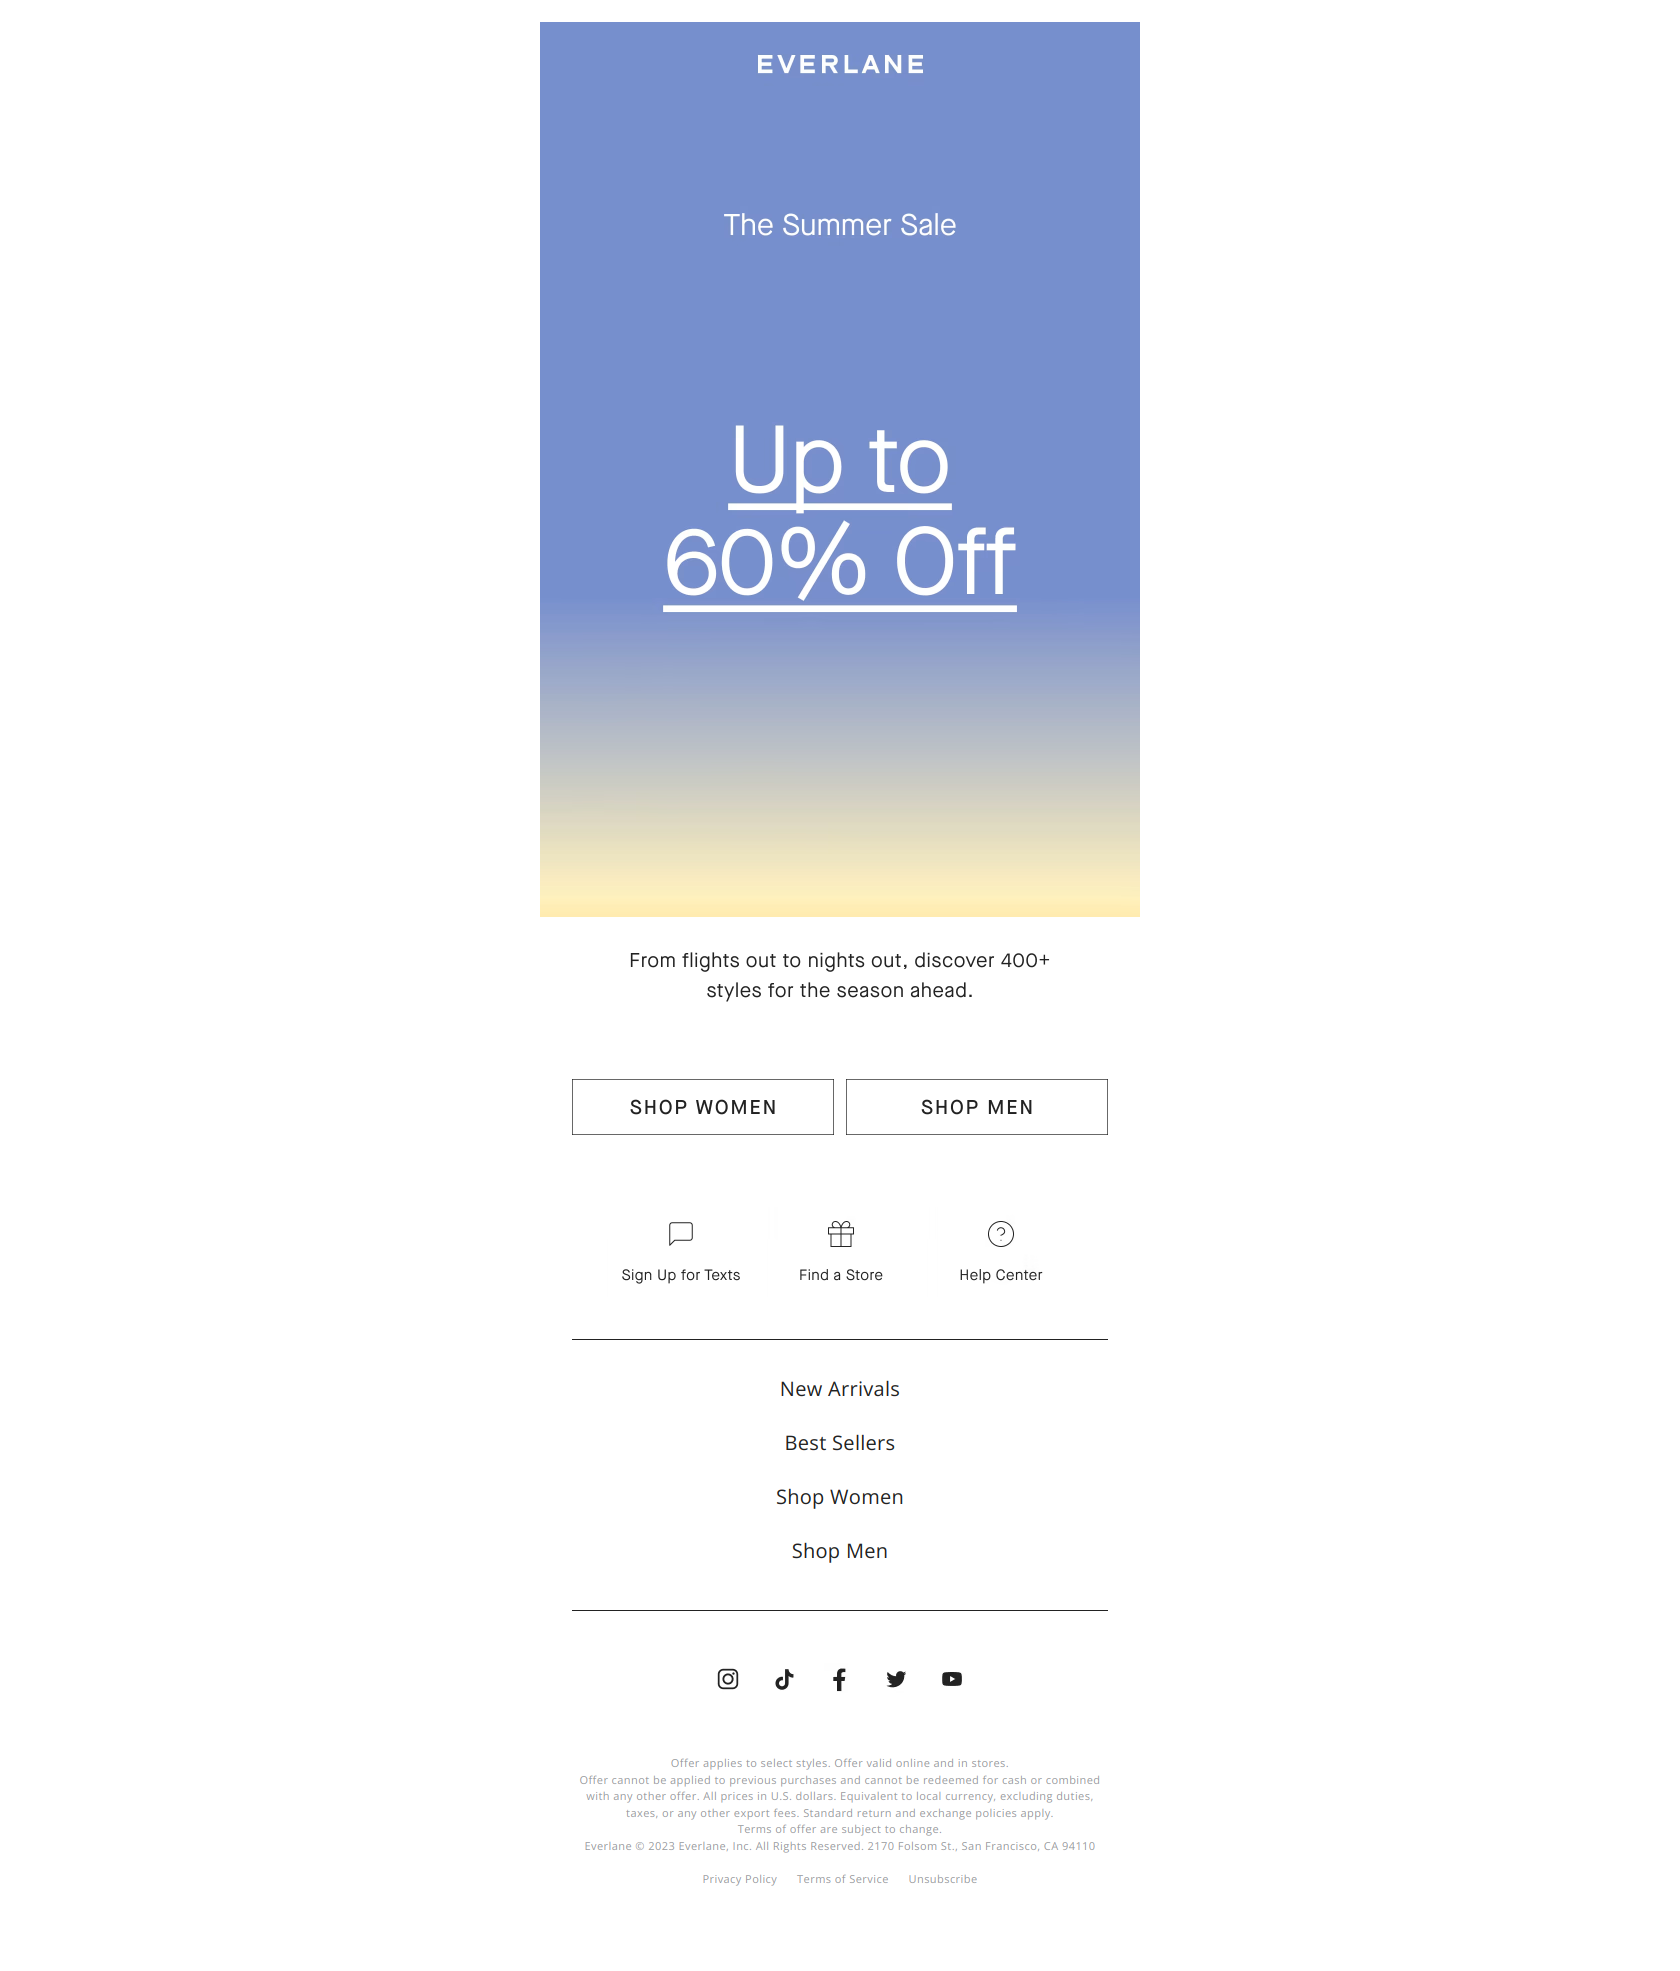 Up to 60% Off: The Summer Sale - Everlane Newsletter